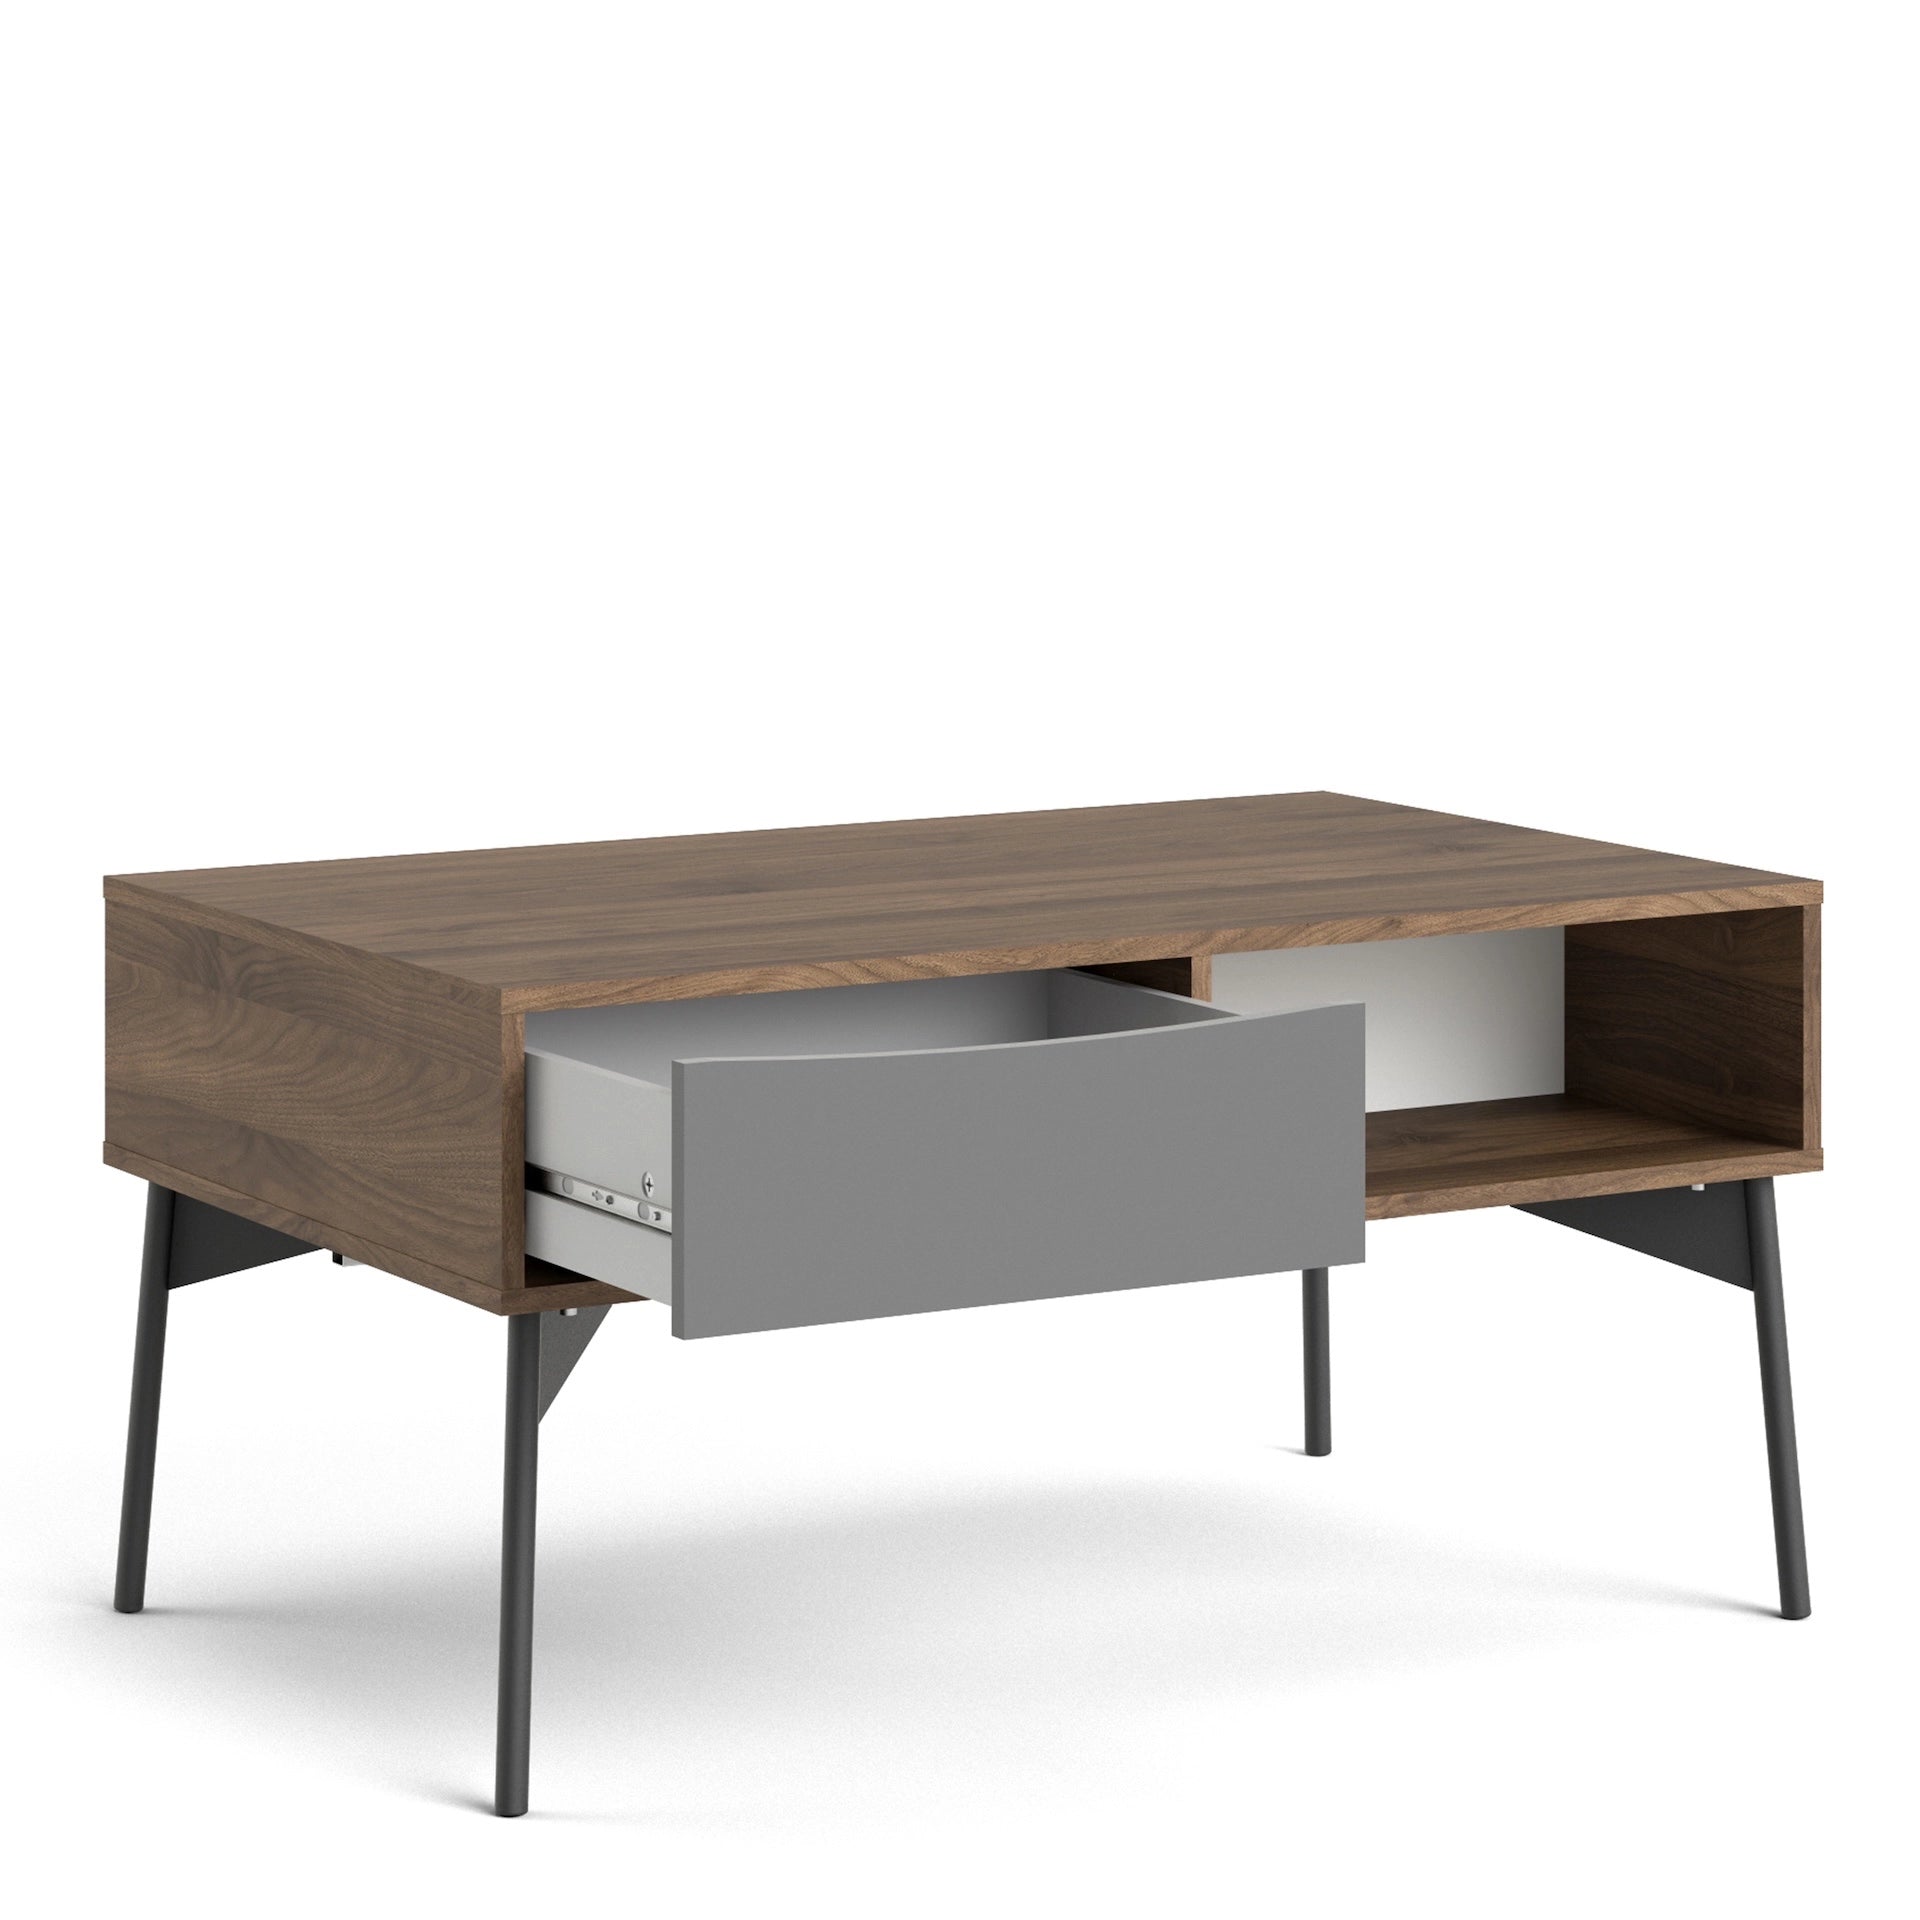 Furniture To Go Fur Coffee Table with 1 Drawer in Grey, White & Walnut